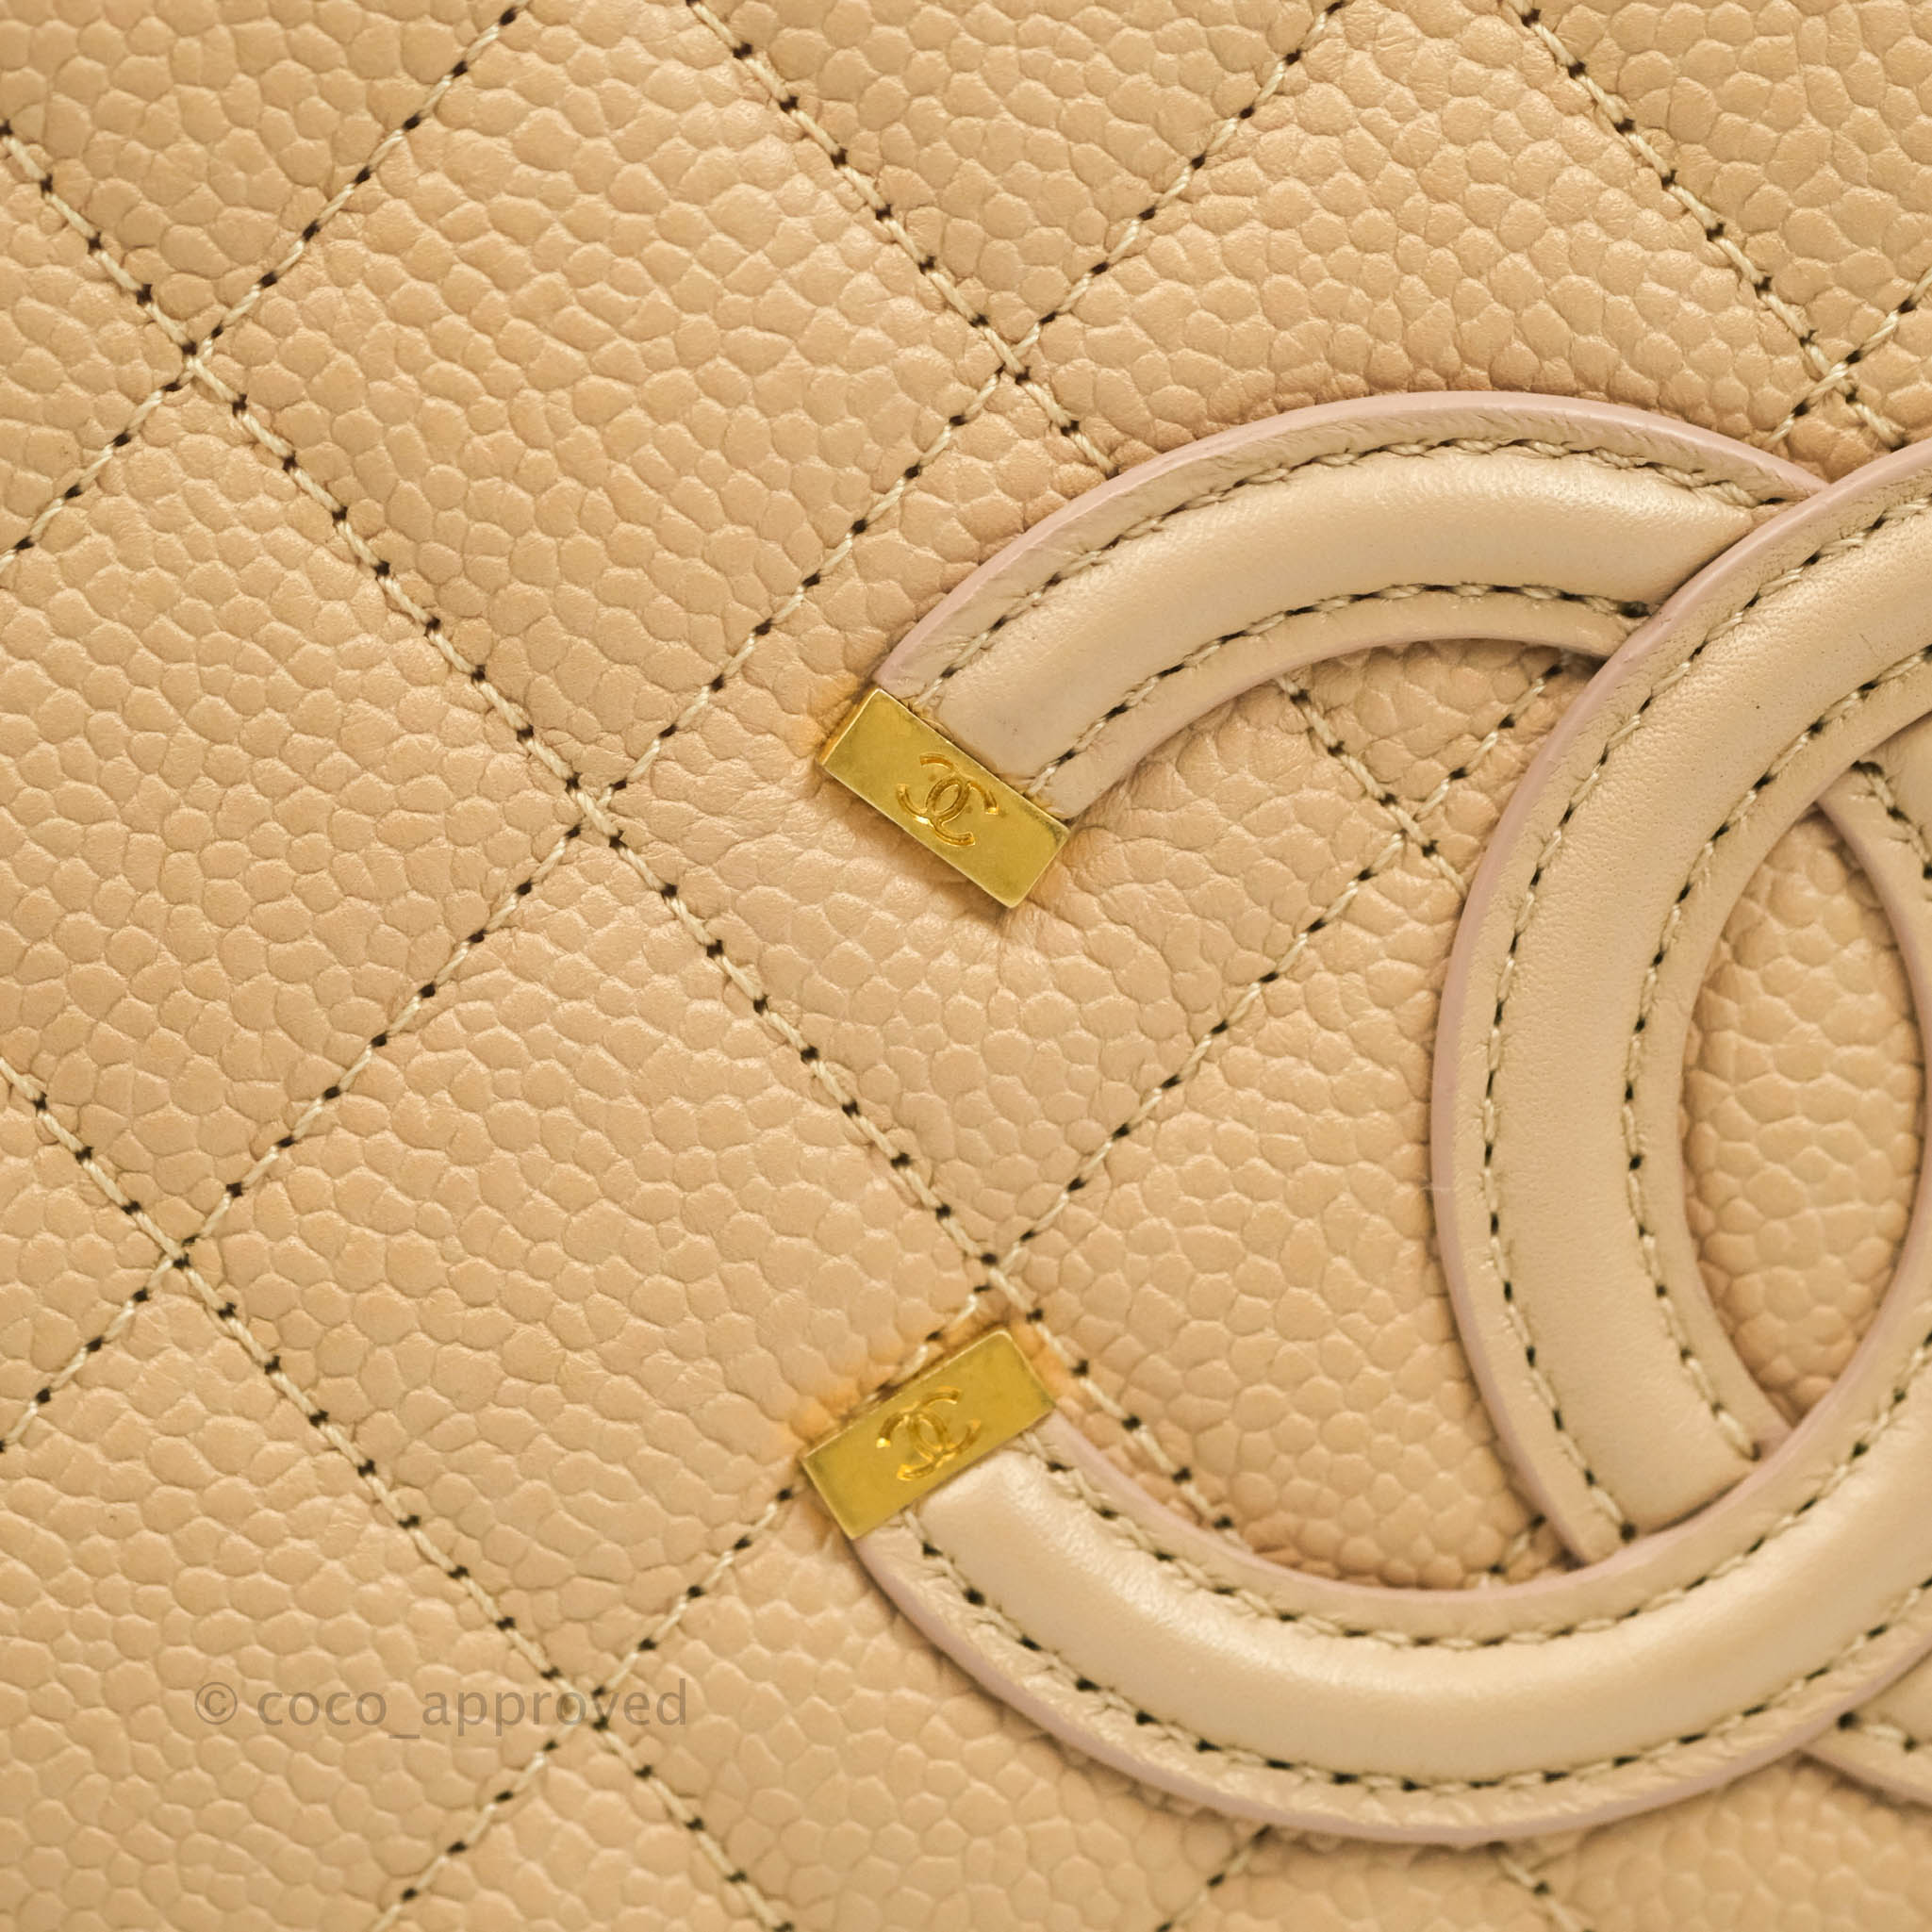 Chanel Filigree Vertical Vanity Case Quilted Caviar Yellow